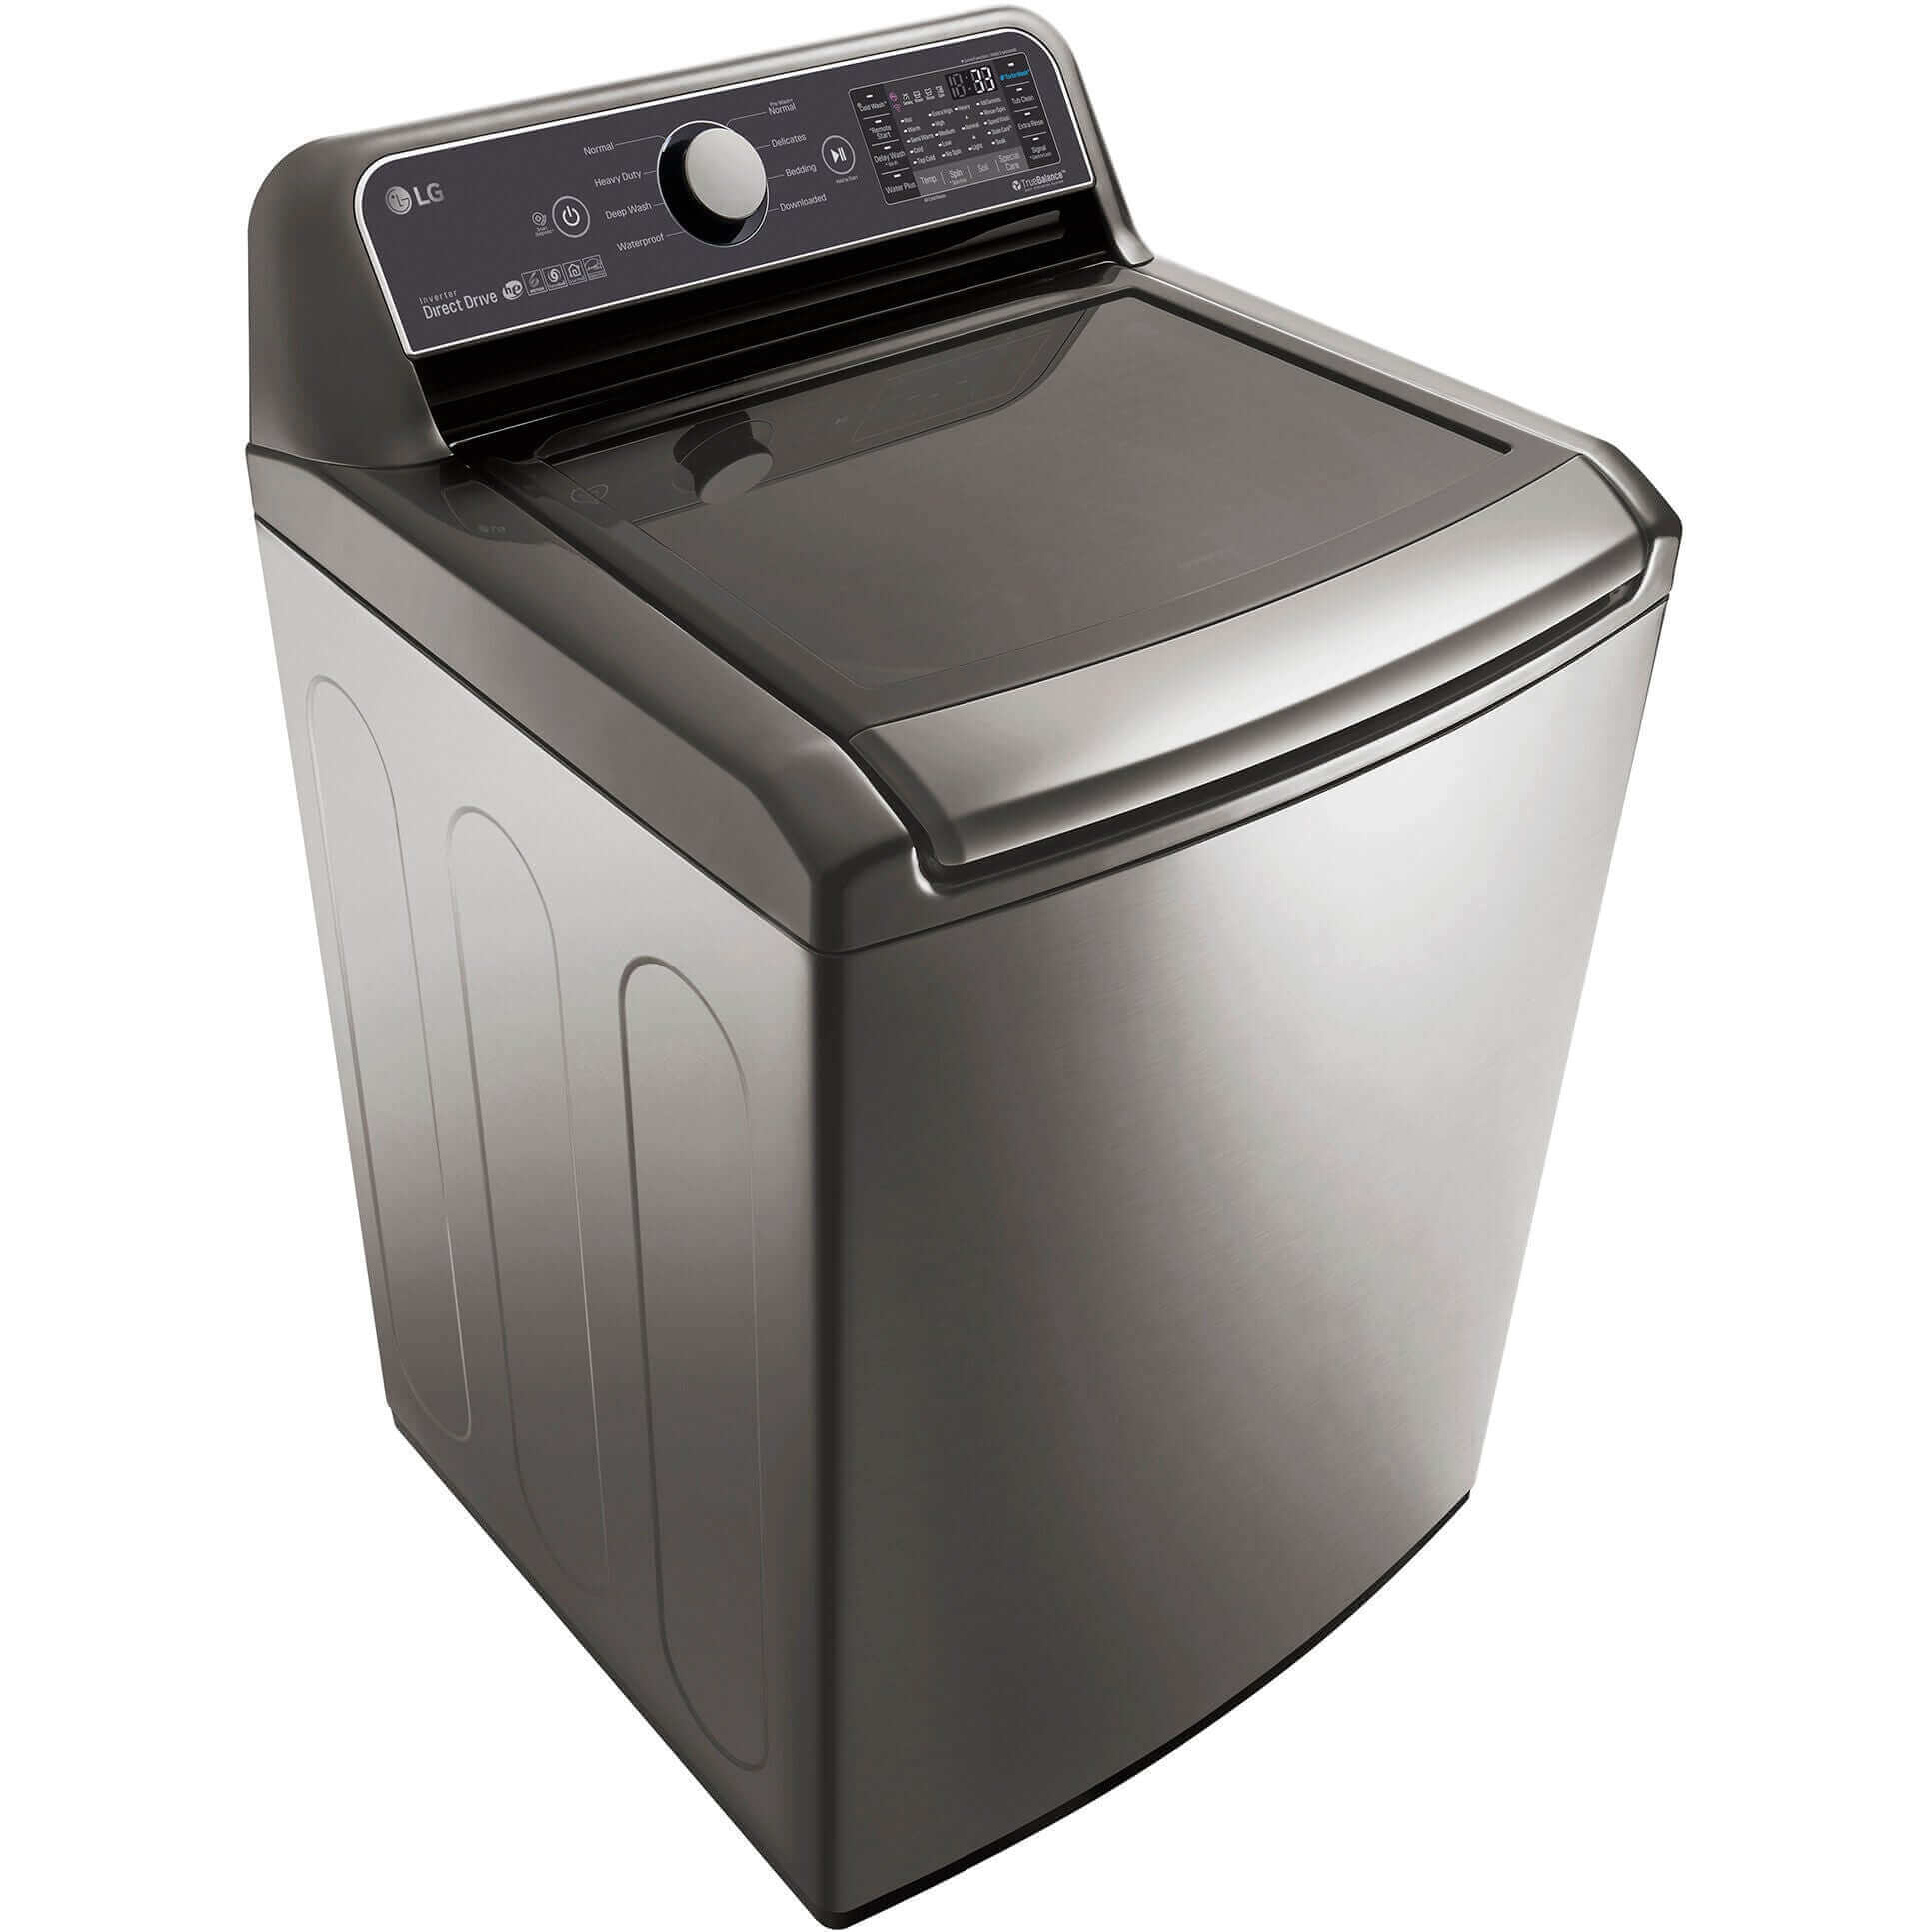 LG 27 in. Top Load Washer with TurboWash in Graphite Steel 5 cu. ft. (WT7300CV)